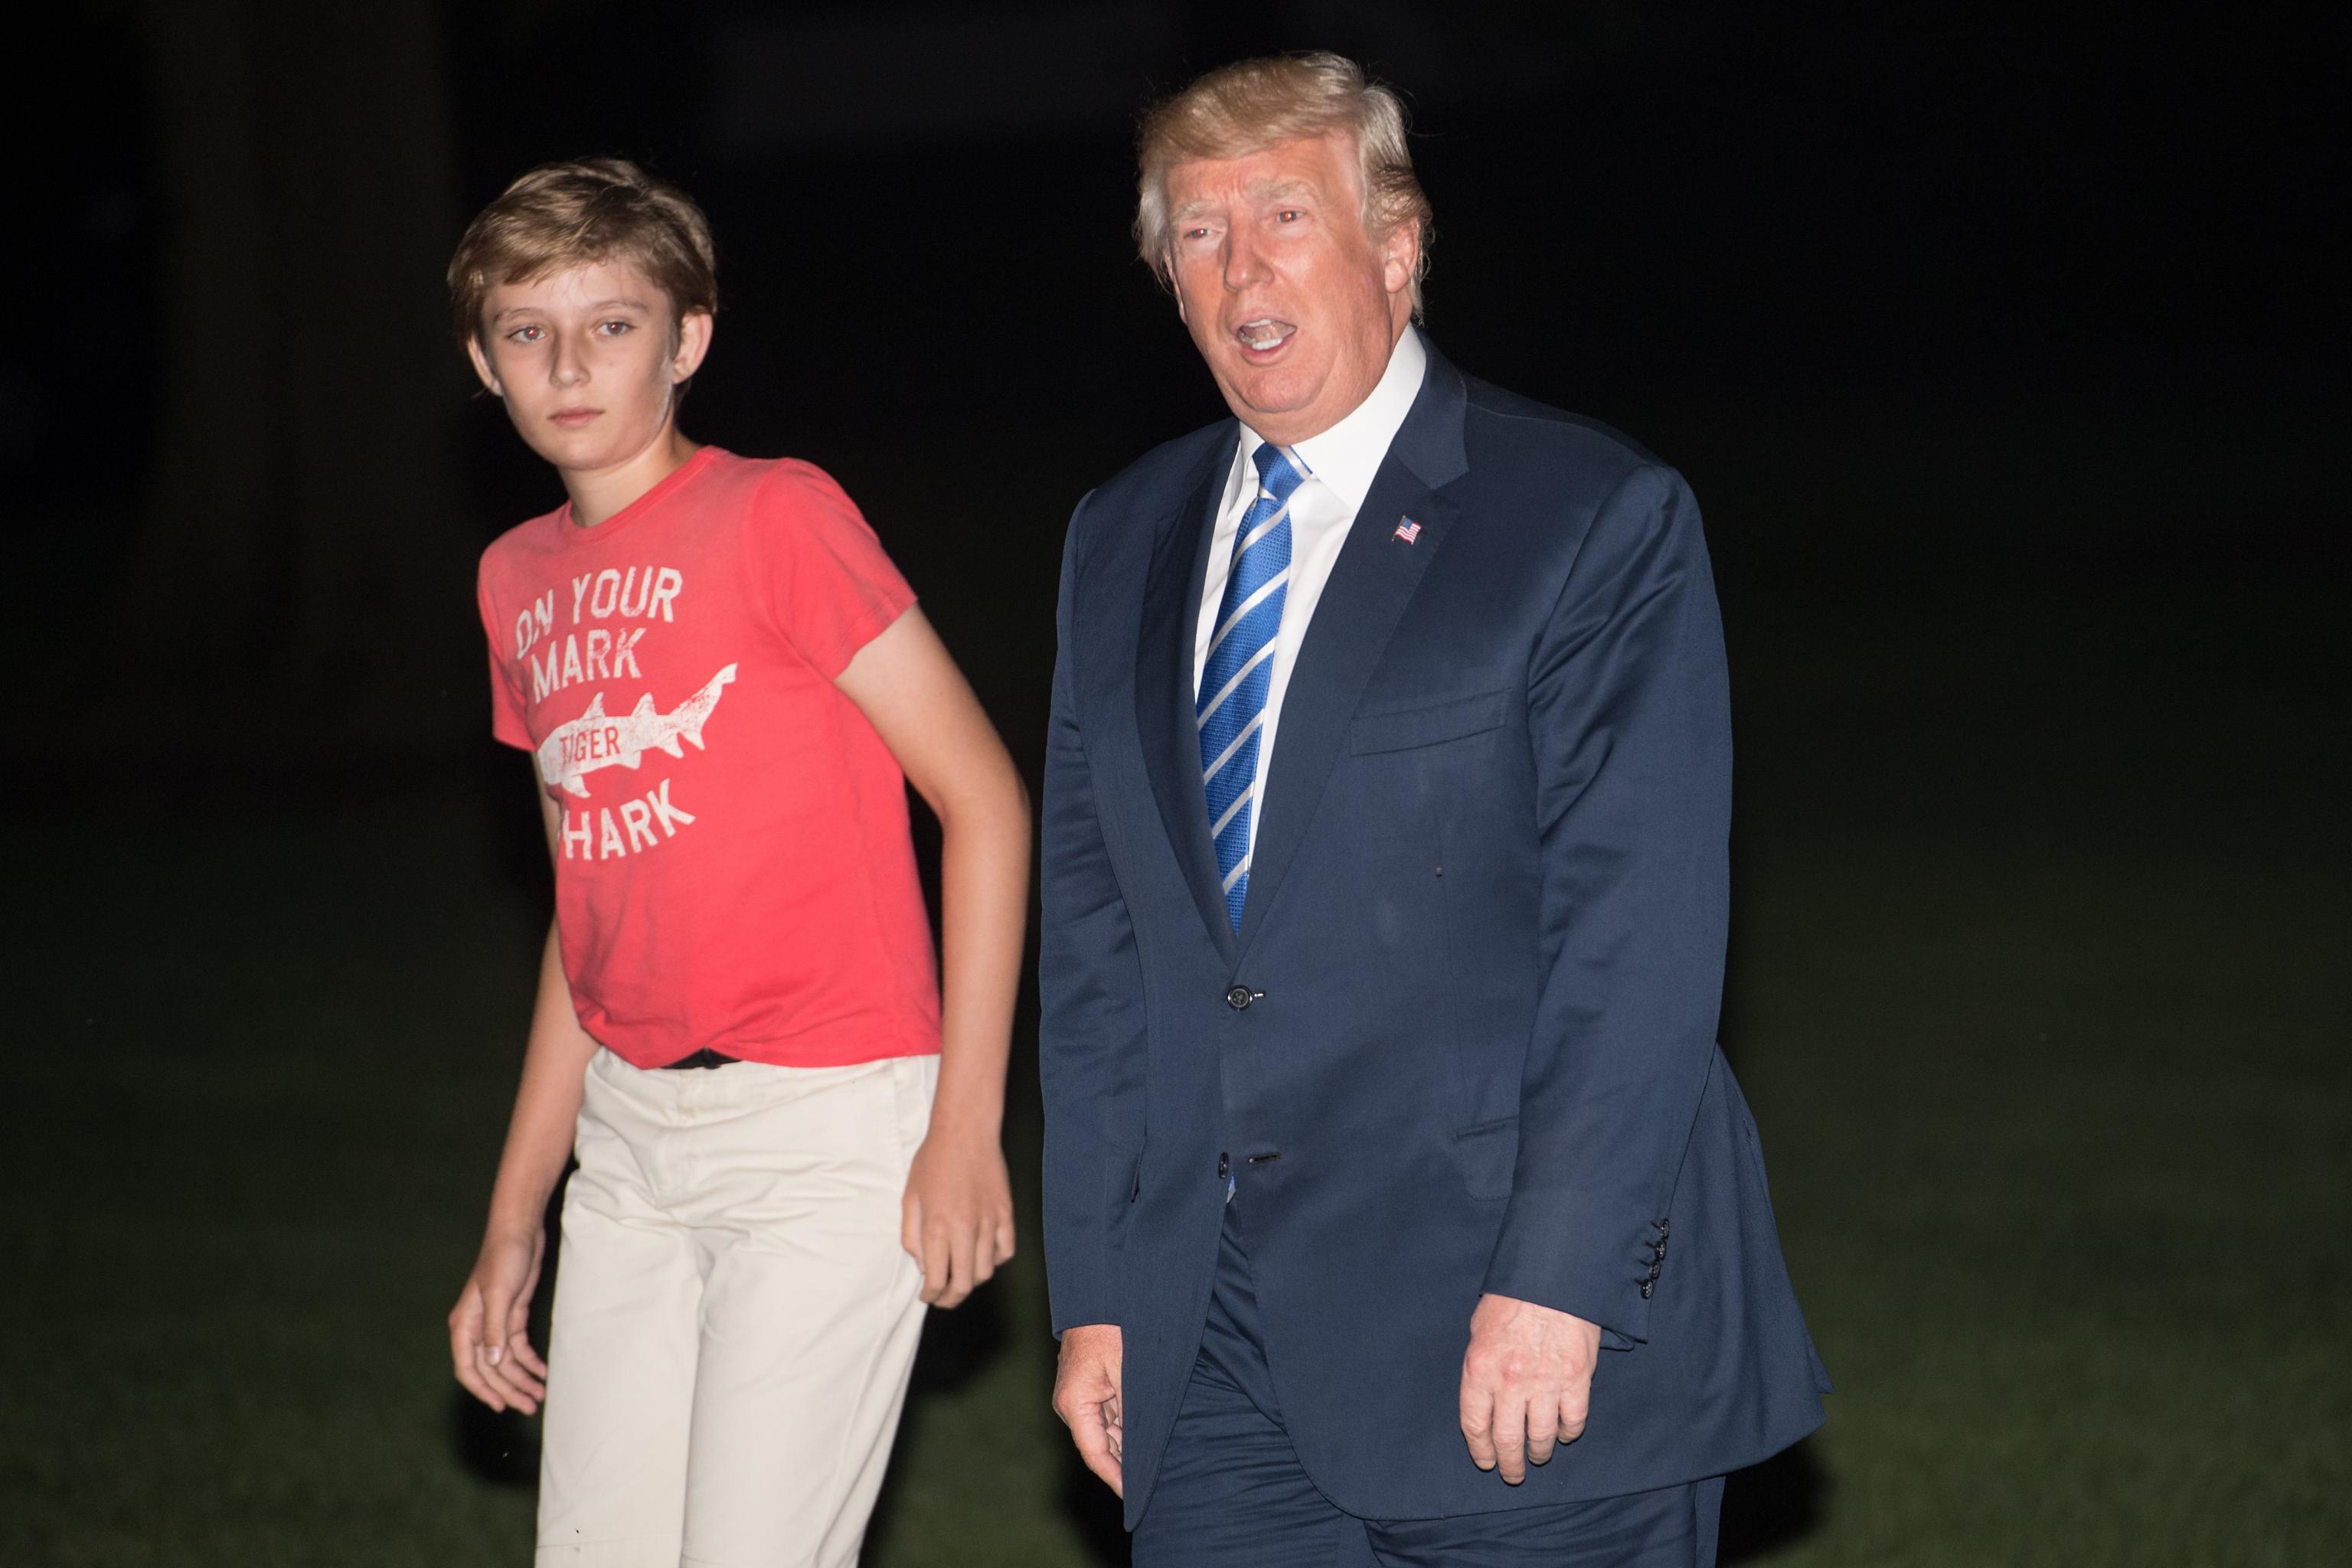 Donald Trump S Son Barron Playing For D C United U 12 Team